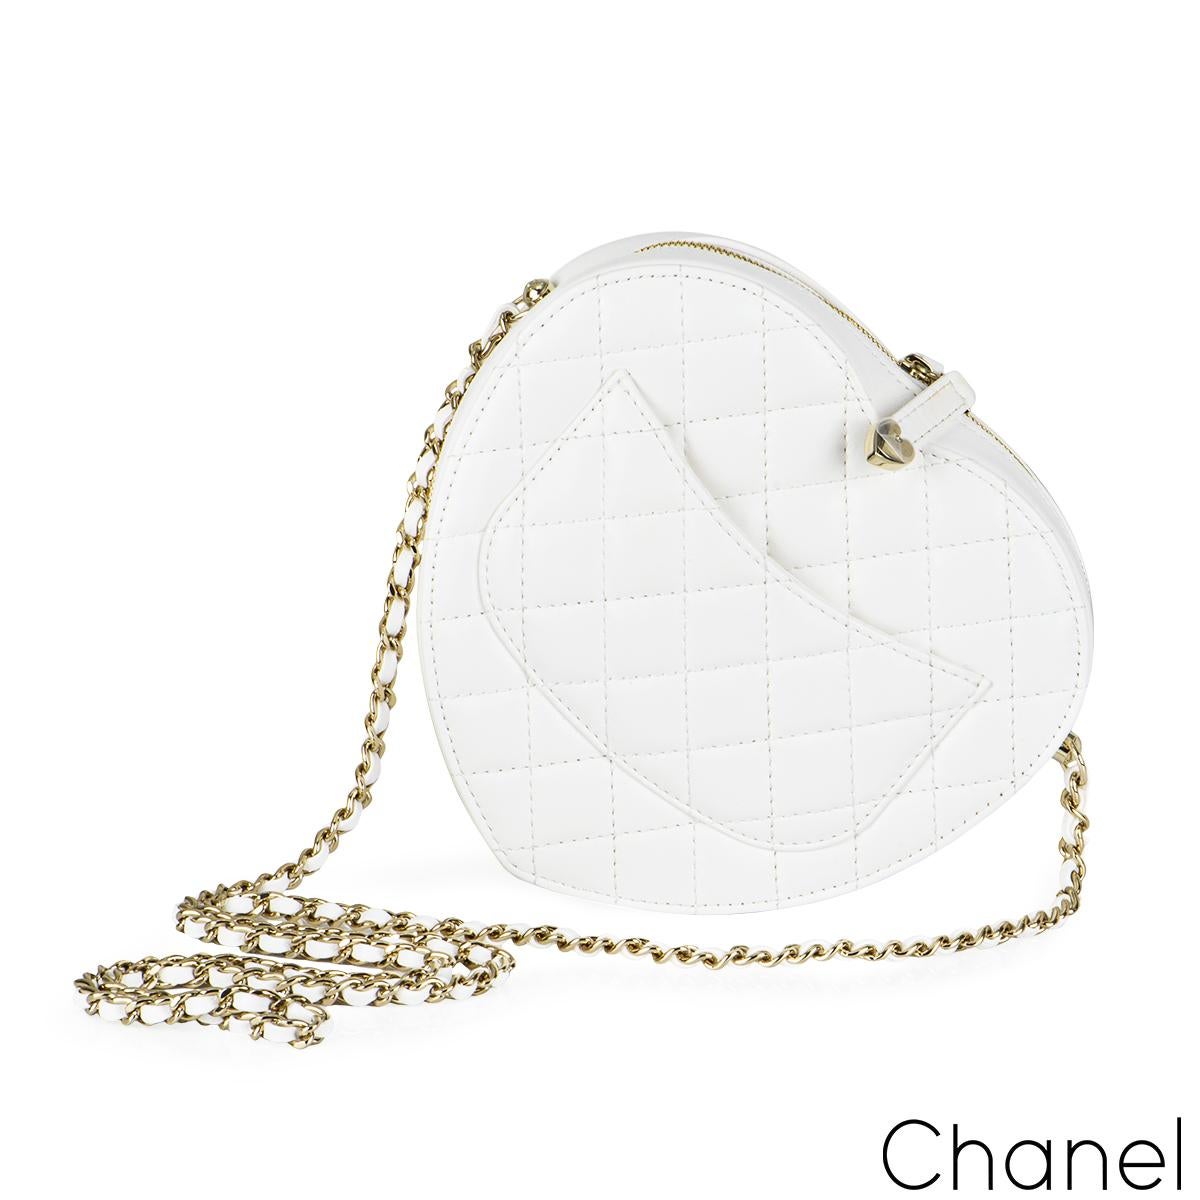 A coveted white Chanel Heart Bag. The exterior of this Heart Bag is crafted with white lambskin leather in the signature diamond style stitching with gold-tone hardware and has a signature logo zipper pull. It features a front flap with signature CC